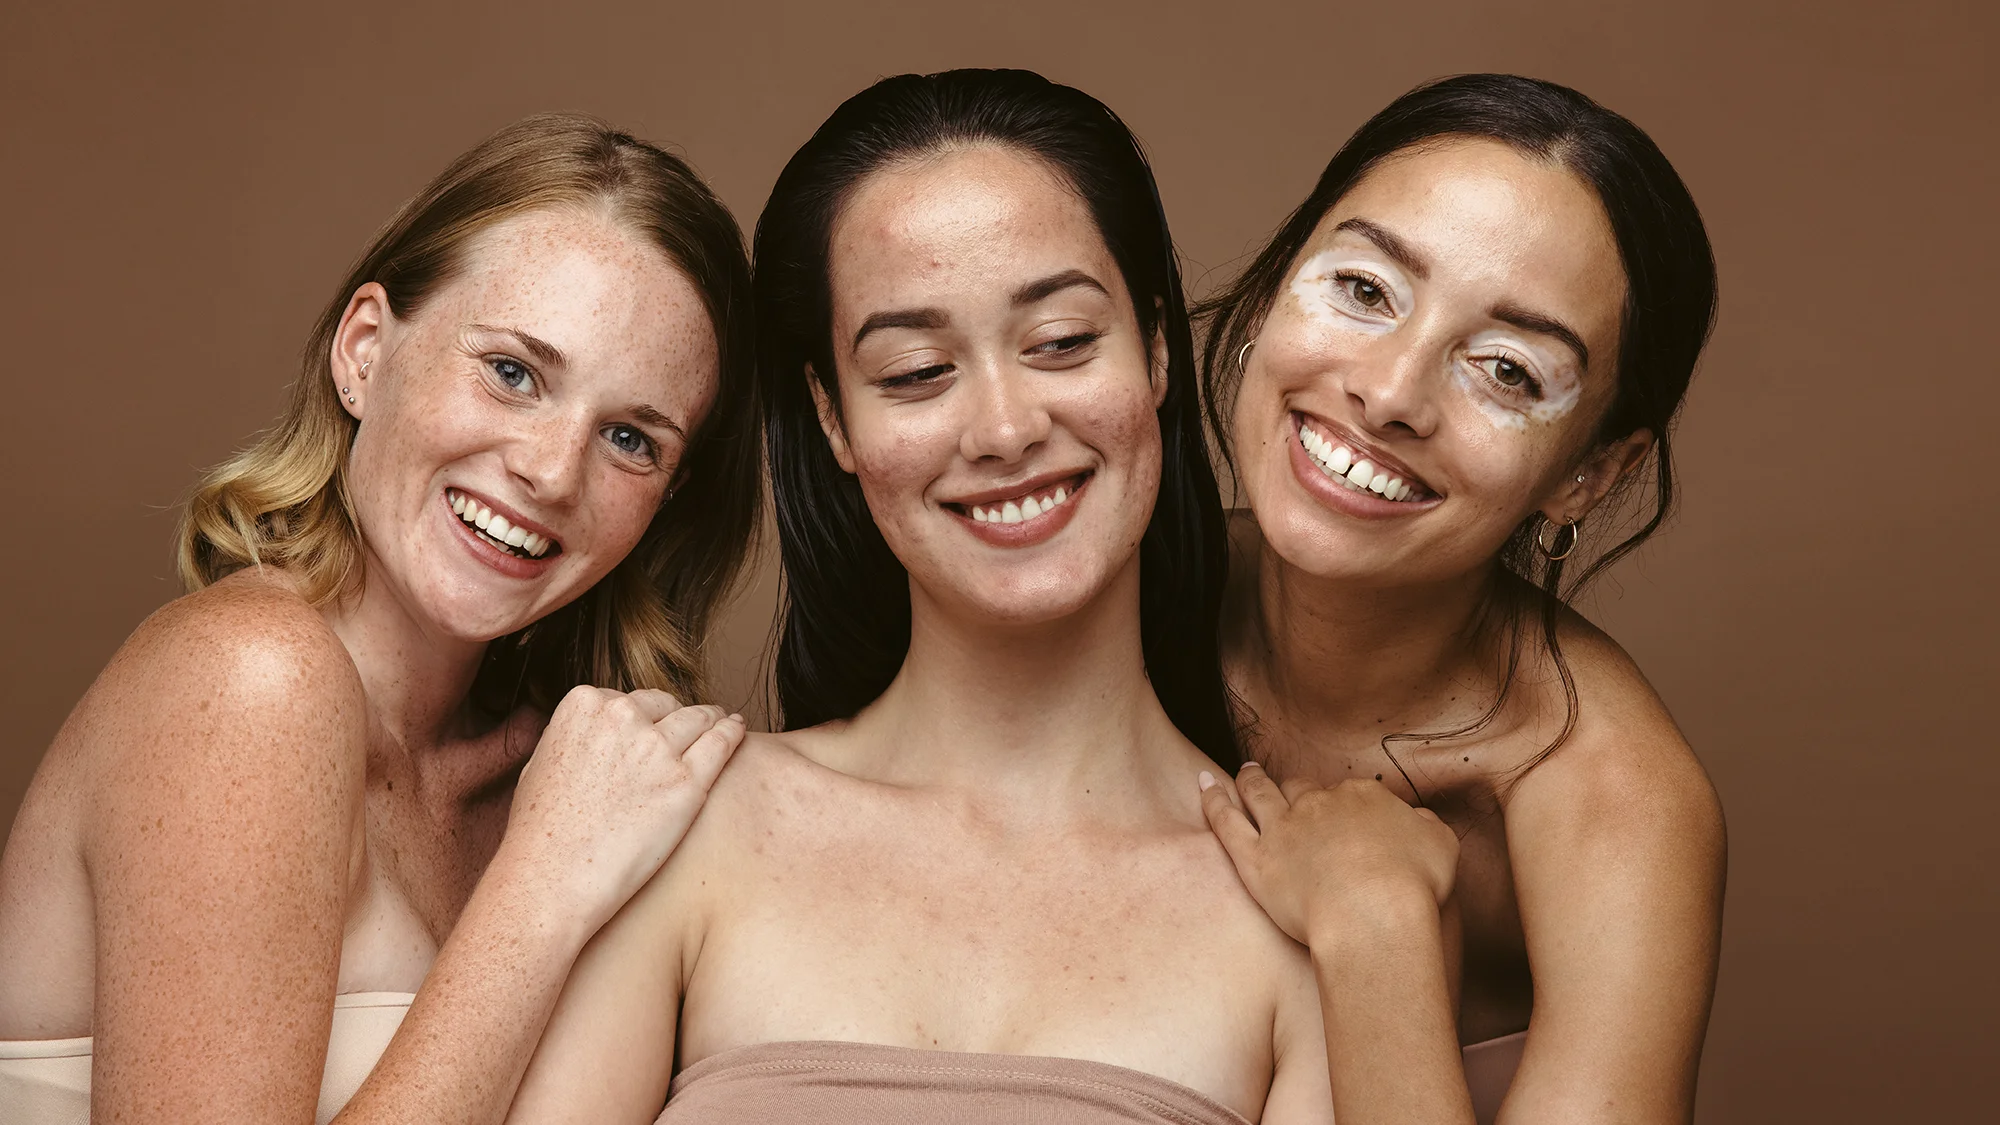 A group of women pose together.